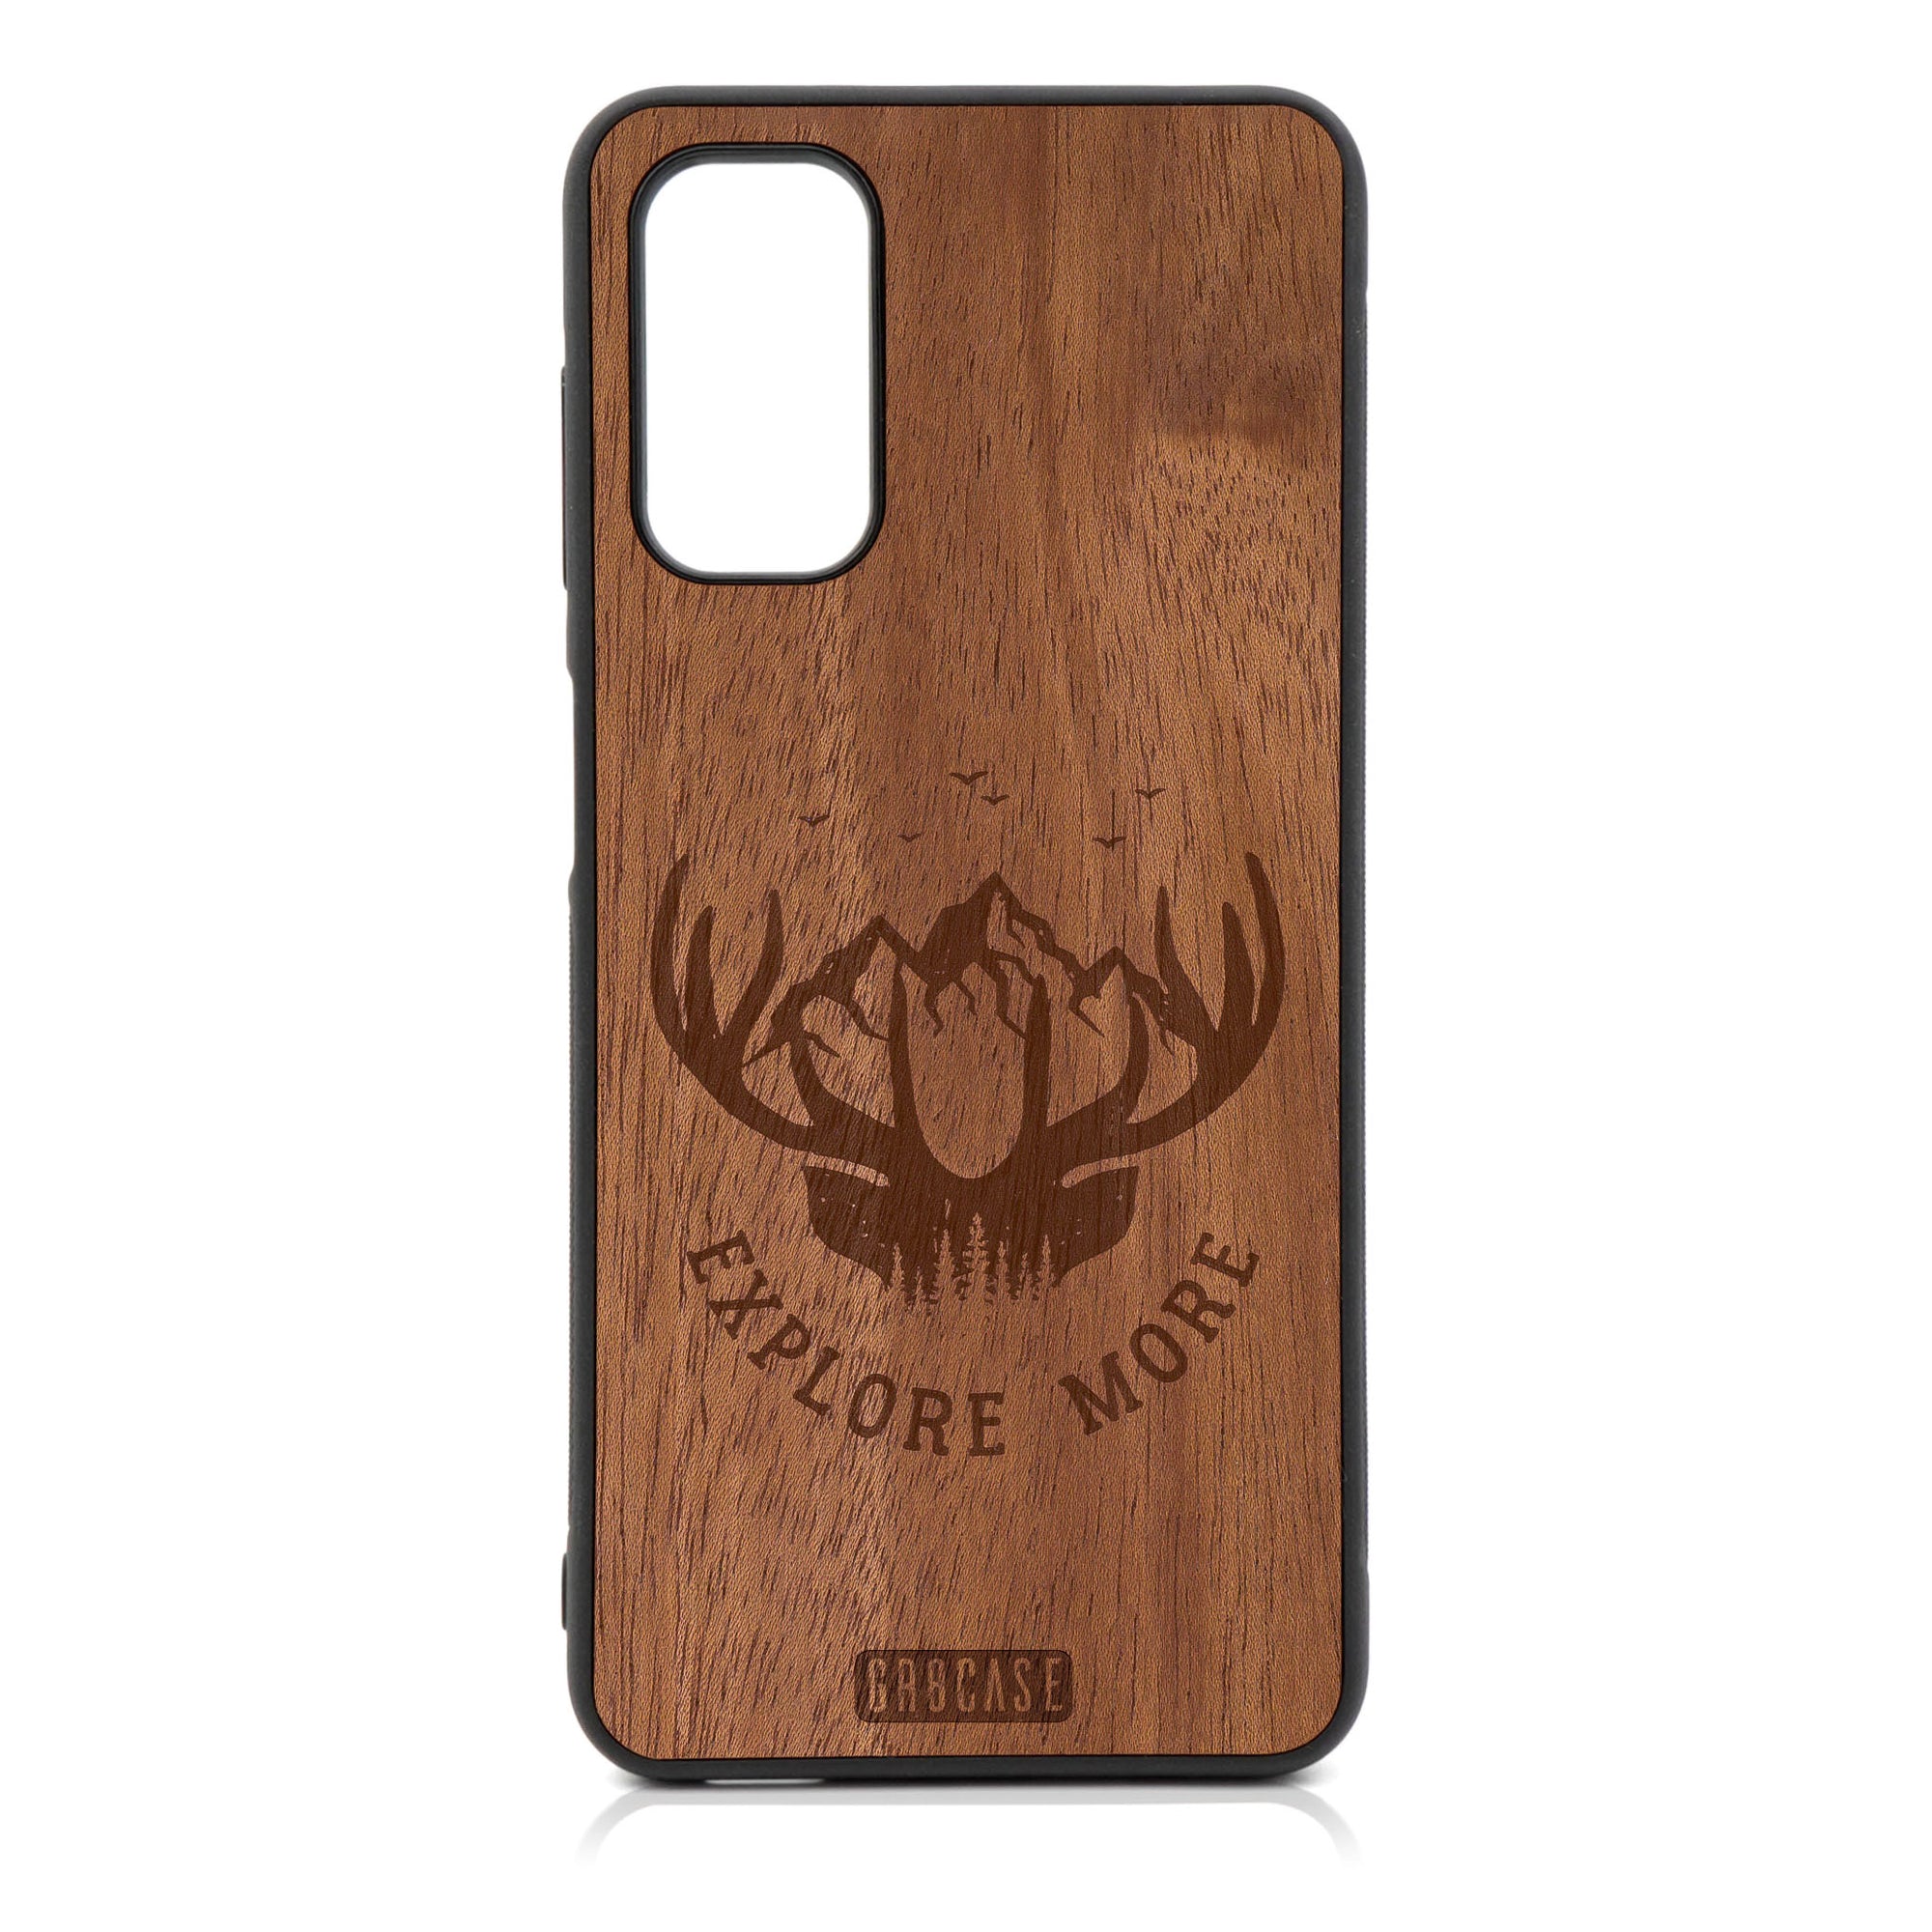 Explore More (Mountain & Antlers) Design Wood Case For Galaxy A13 5G